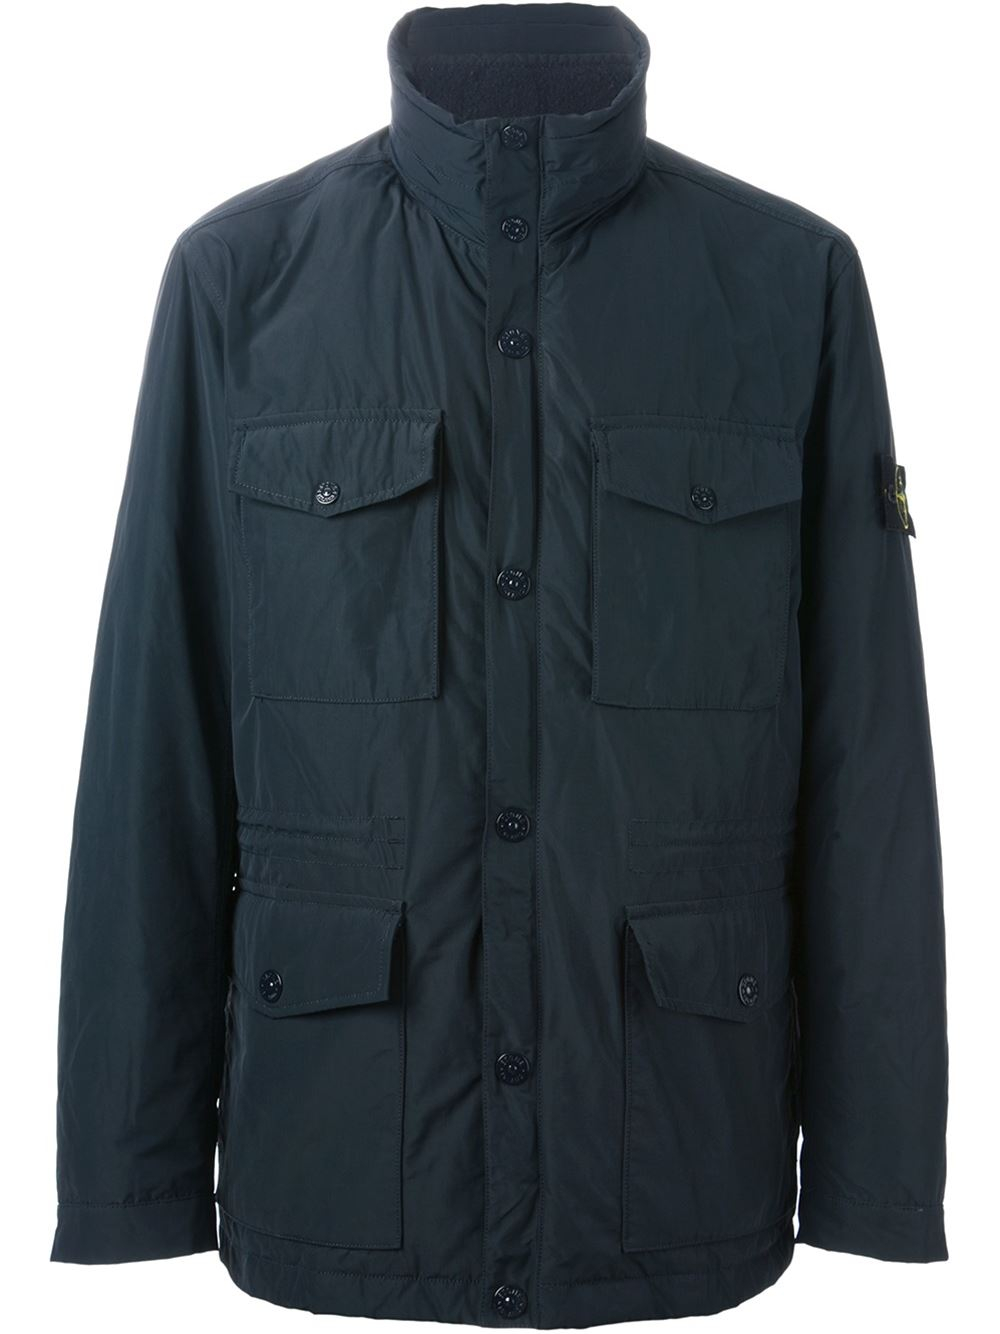 Stone Island 'Micro Reps' Coat in Blue for Men | Lyst